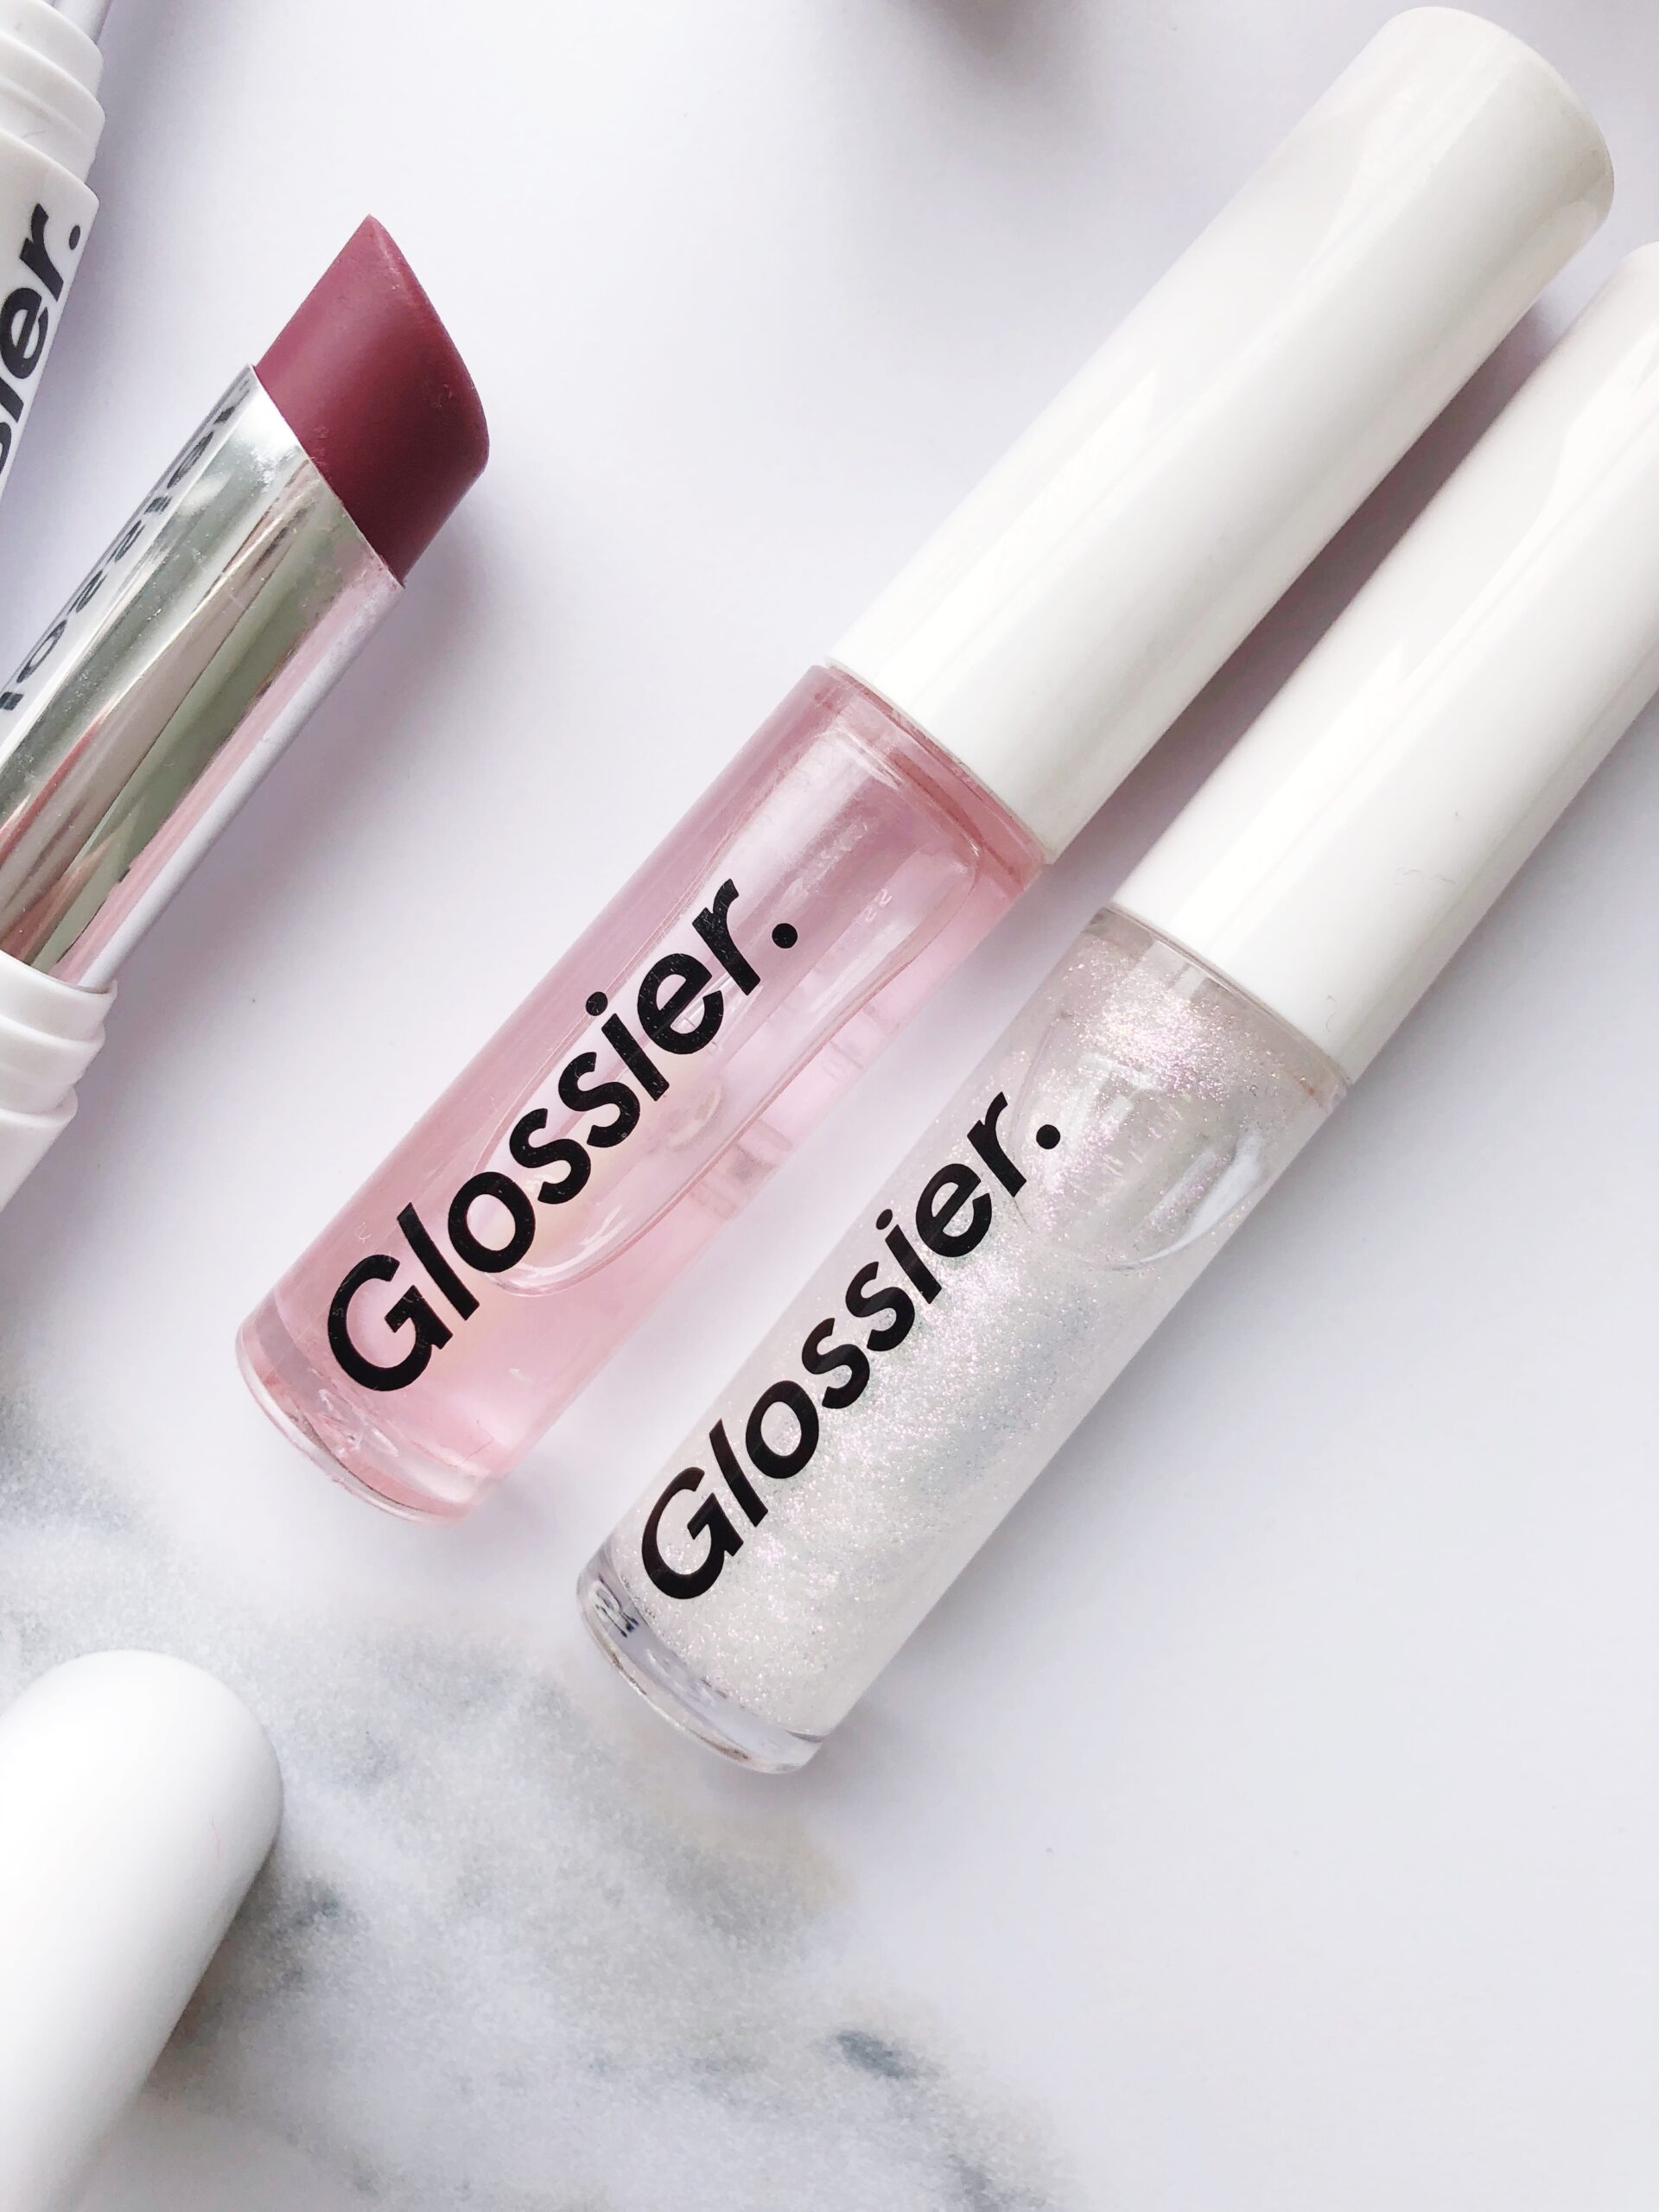 10 Amazing Beauty Products You'll Wish You'd Known About Sooner